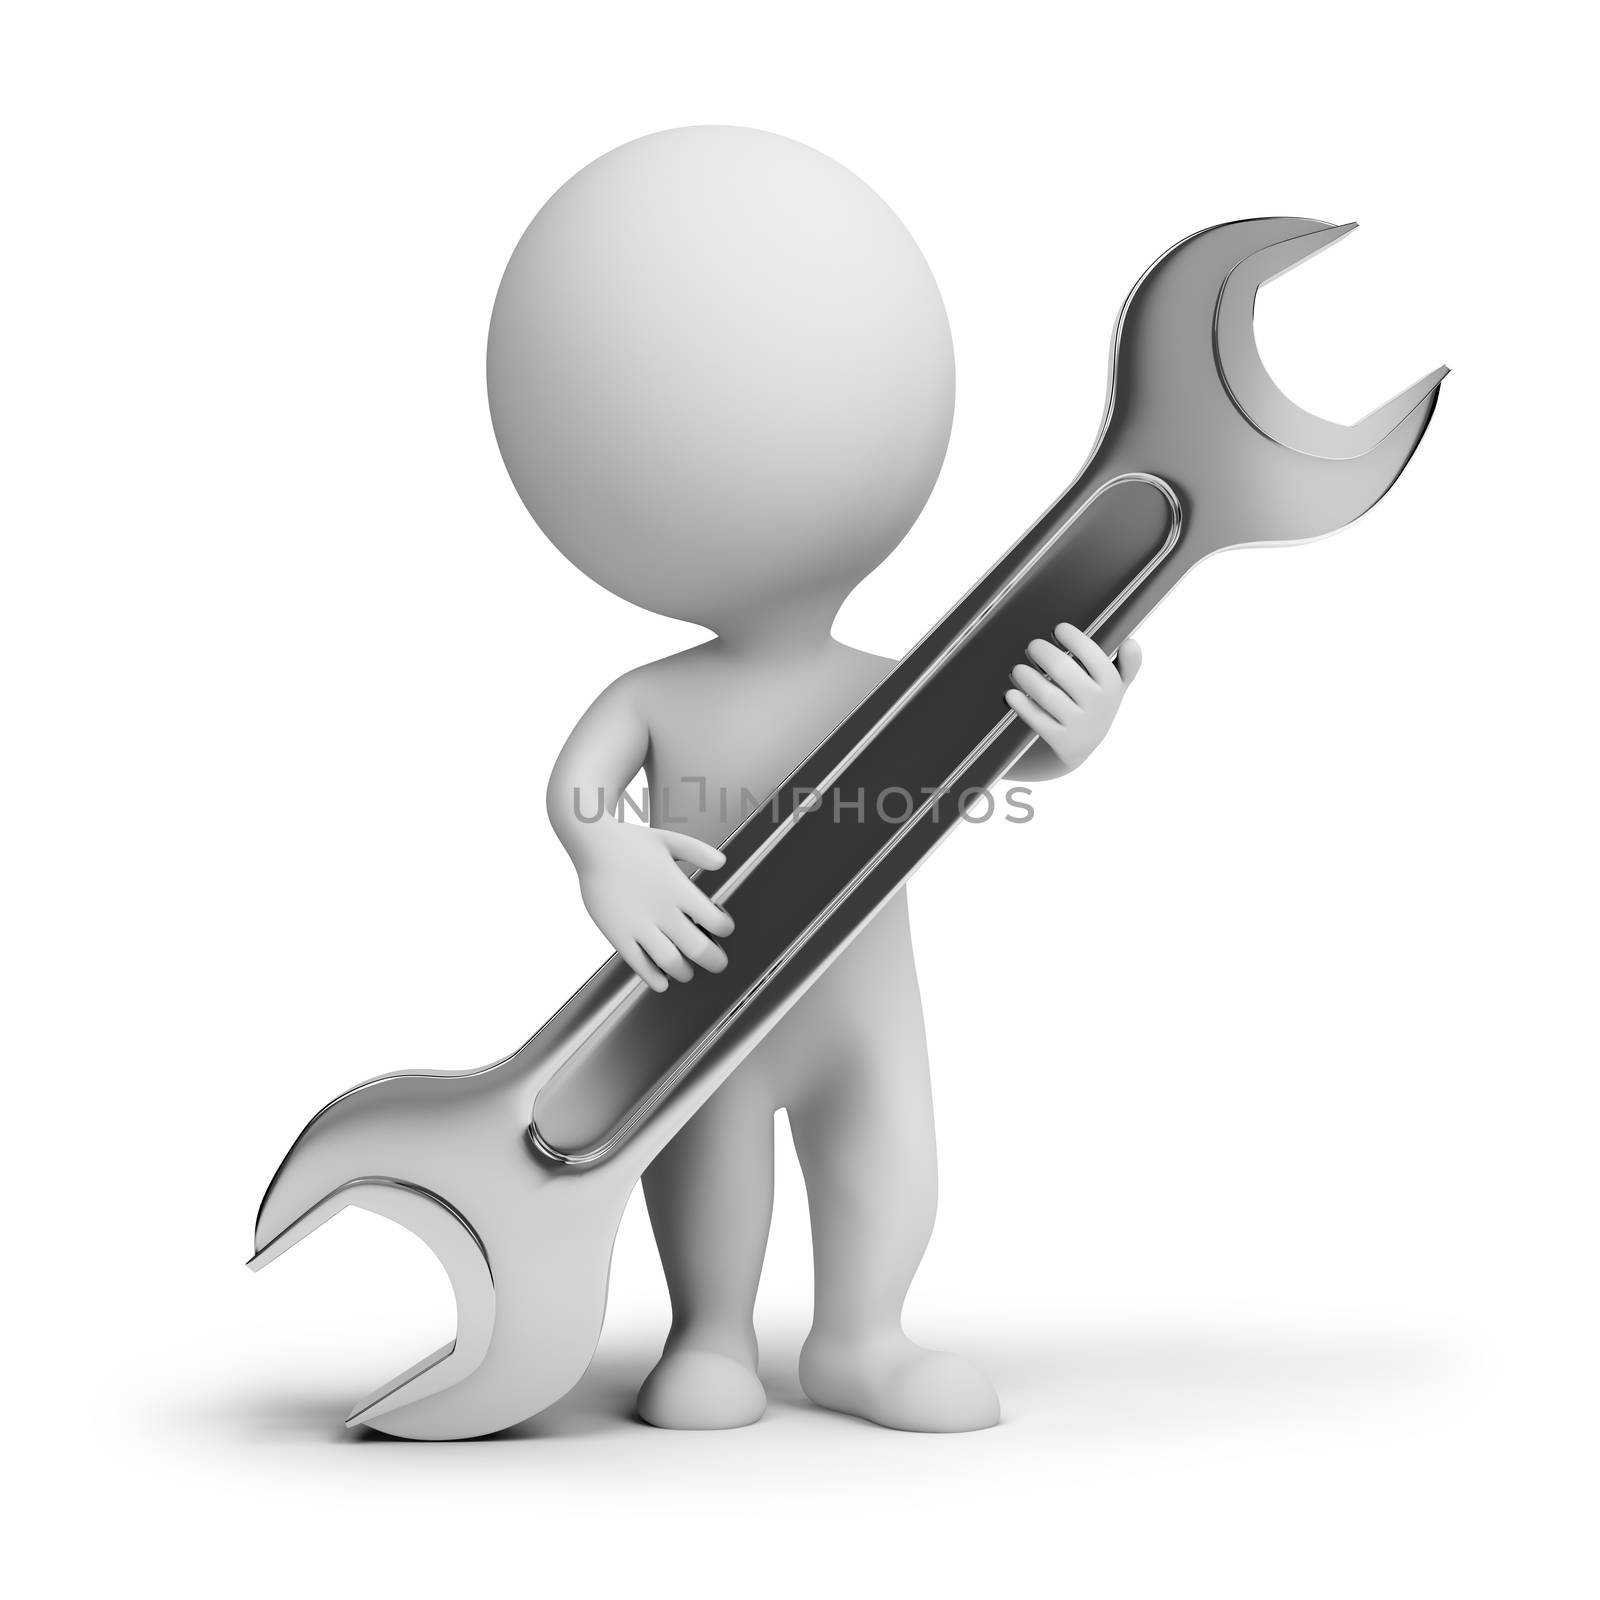 3d small people with a wrench in hands. 3d image. Isolated white background.